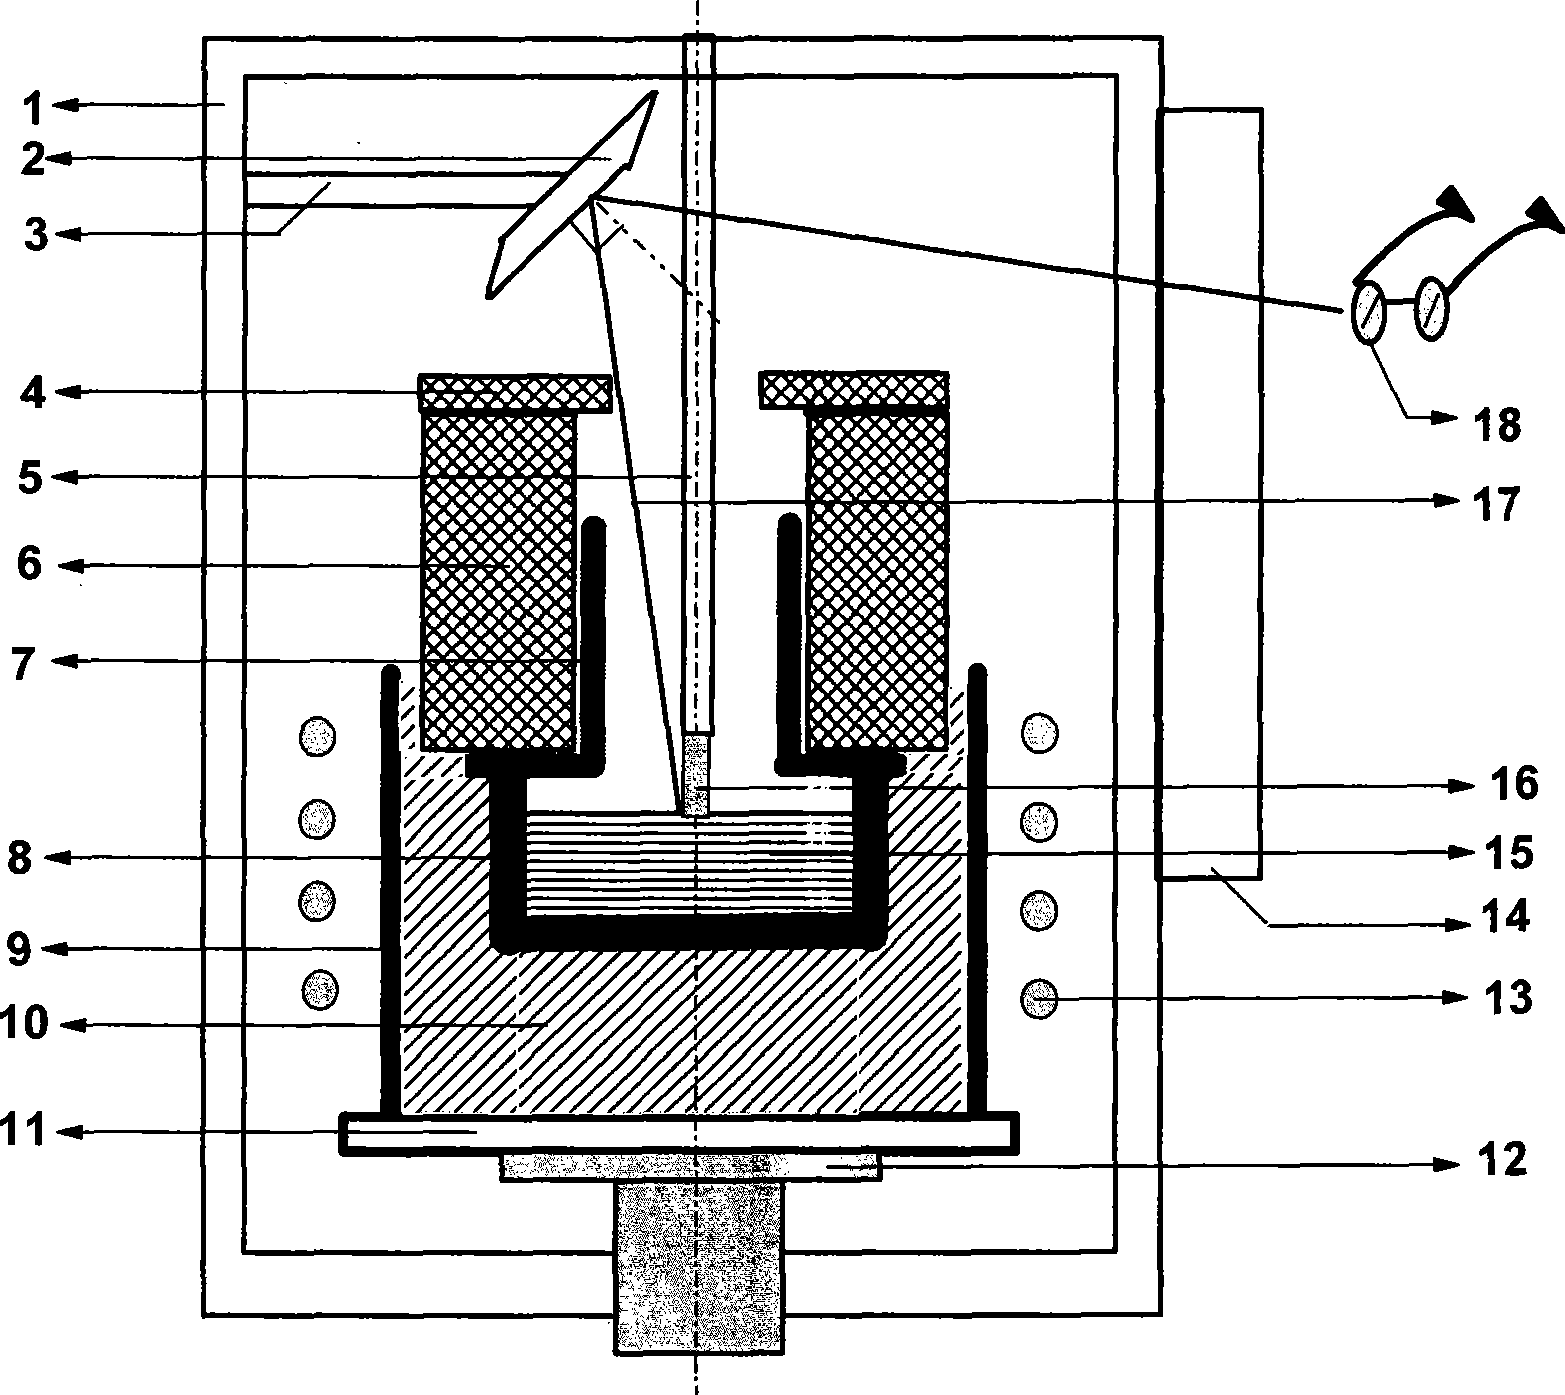 Apparatus for growing lithium aluminate crystal by czochralski method